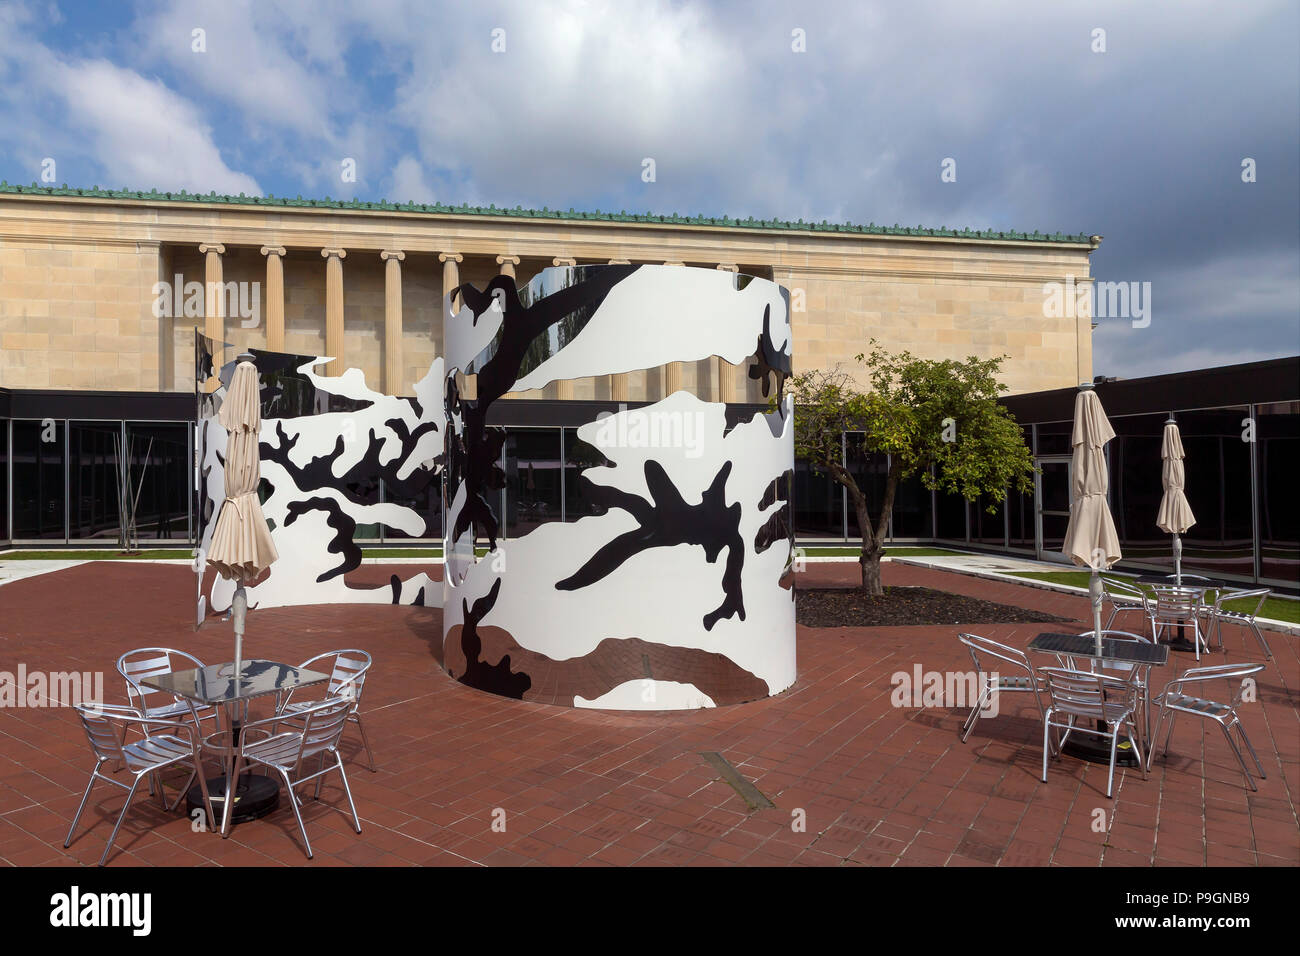 Look and See, Jim Hodges, 2005, in Cafe,  Albright-Knox Art Gallery, Buffalo, New York, USA, North America Stock Photo